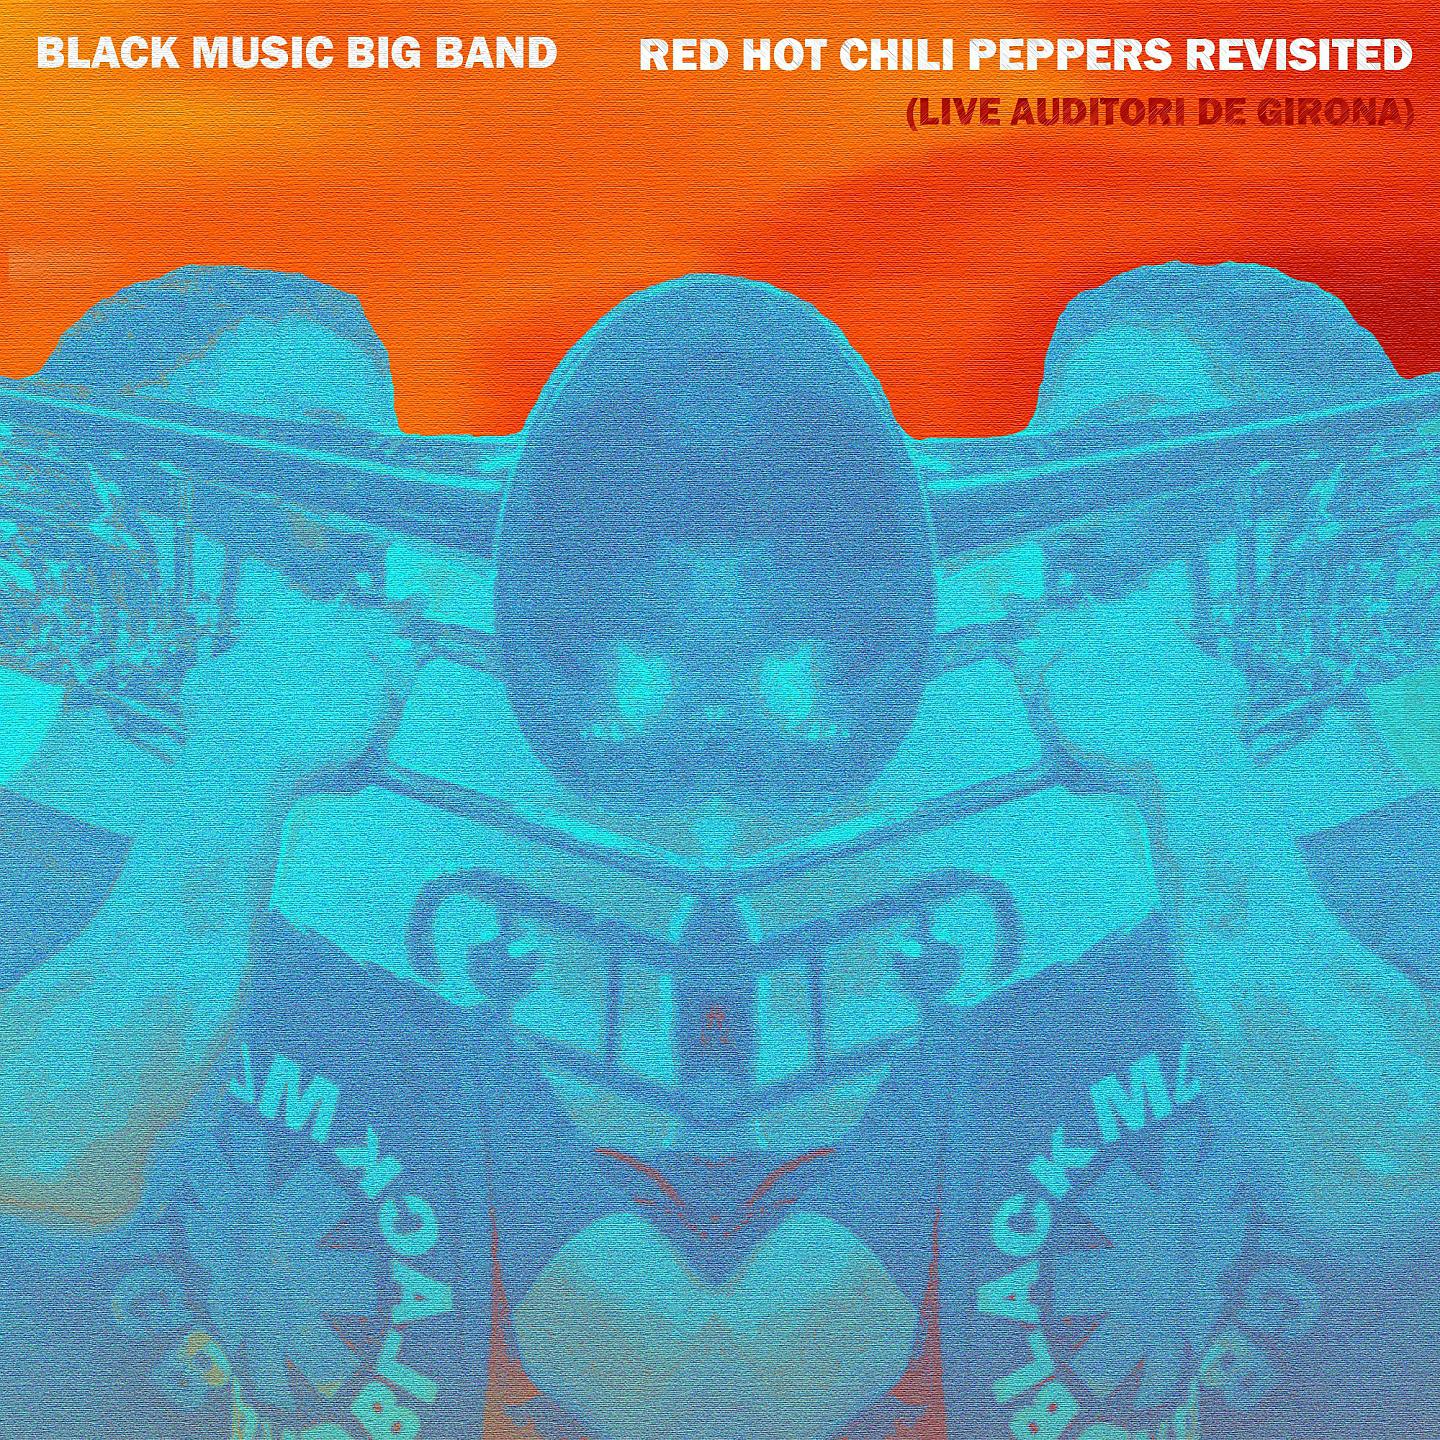 Постер альбома Red Hot Chili Peppers Revisited